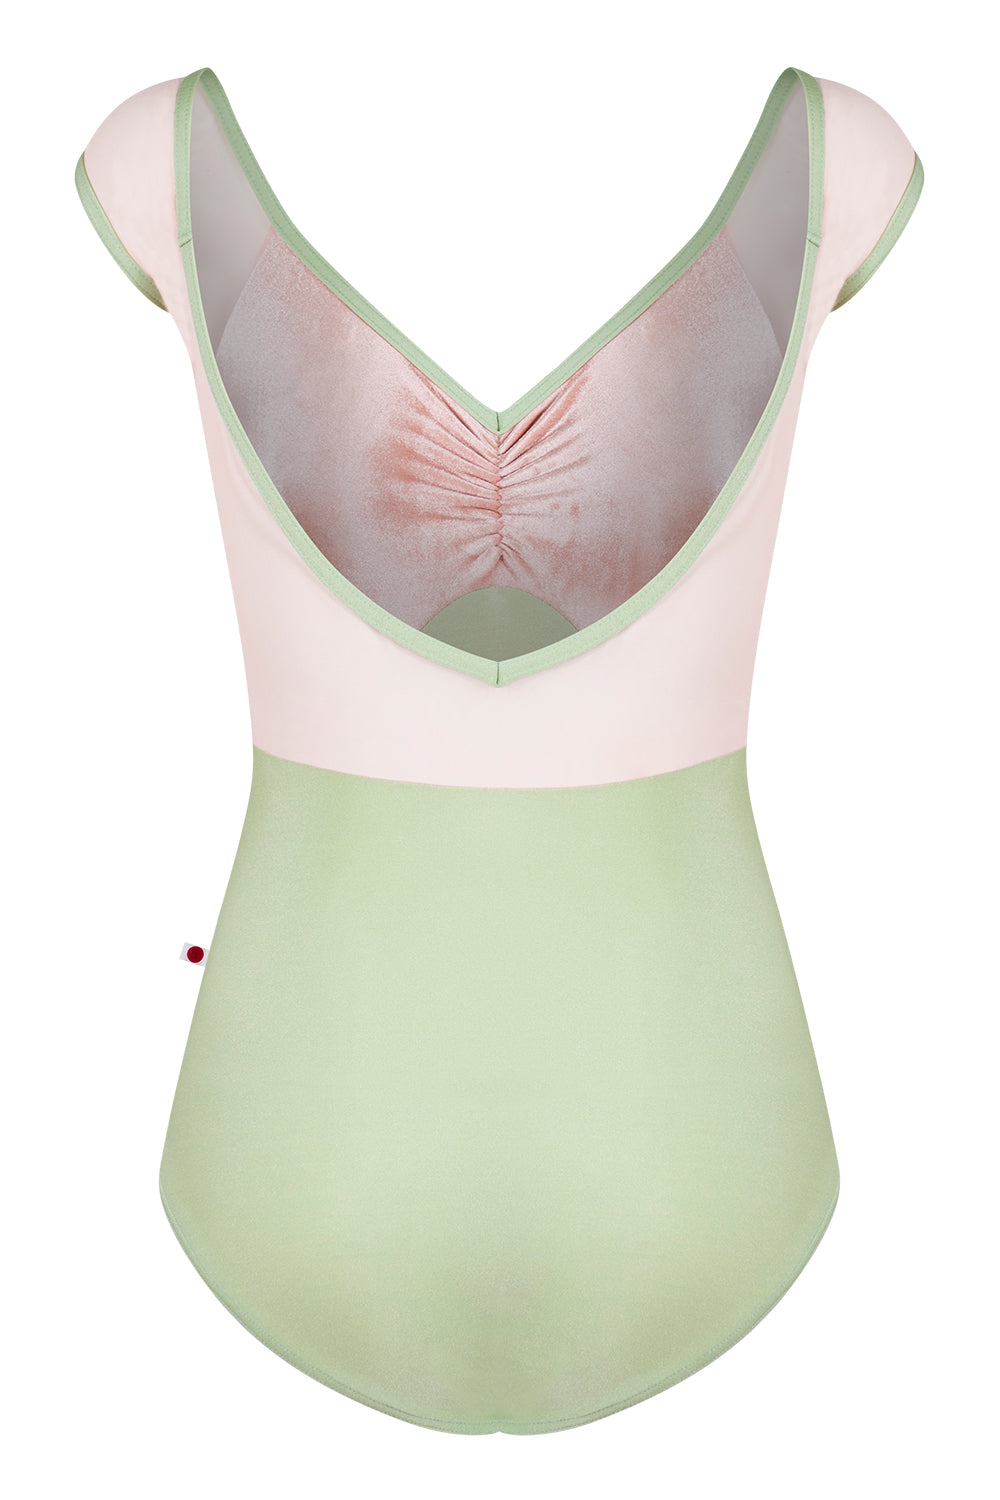 Elli leotard in N-Ginko body color with V-Blush top color, Mesh Blush cap sleeves and N-Ginko trim color